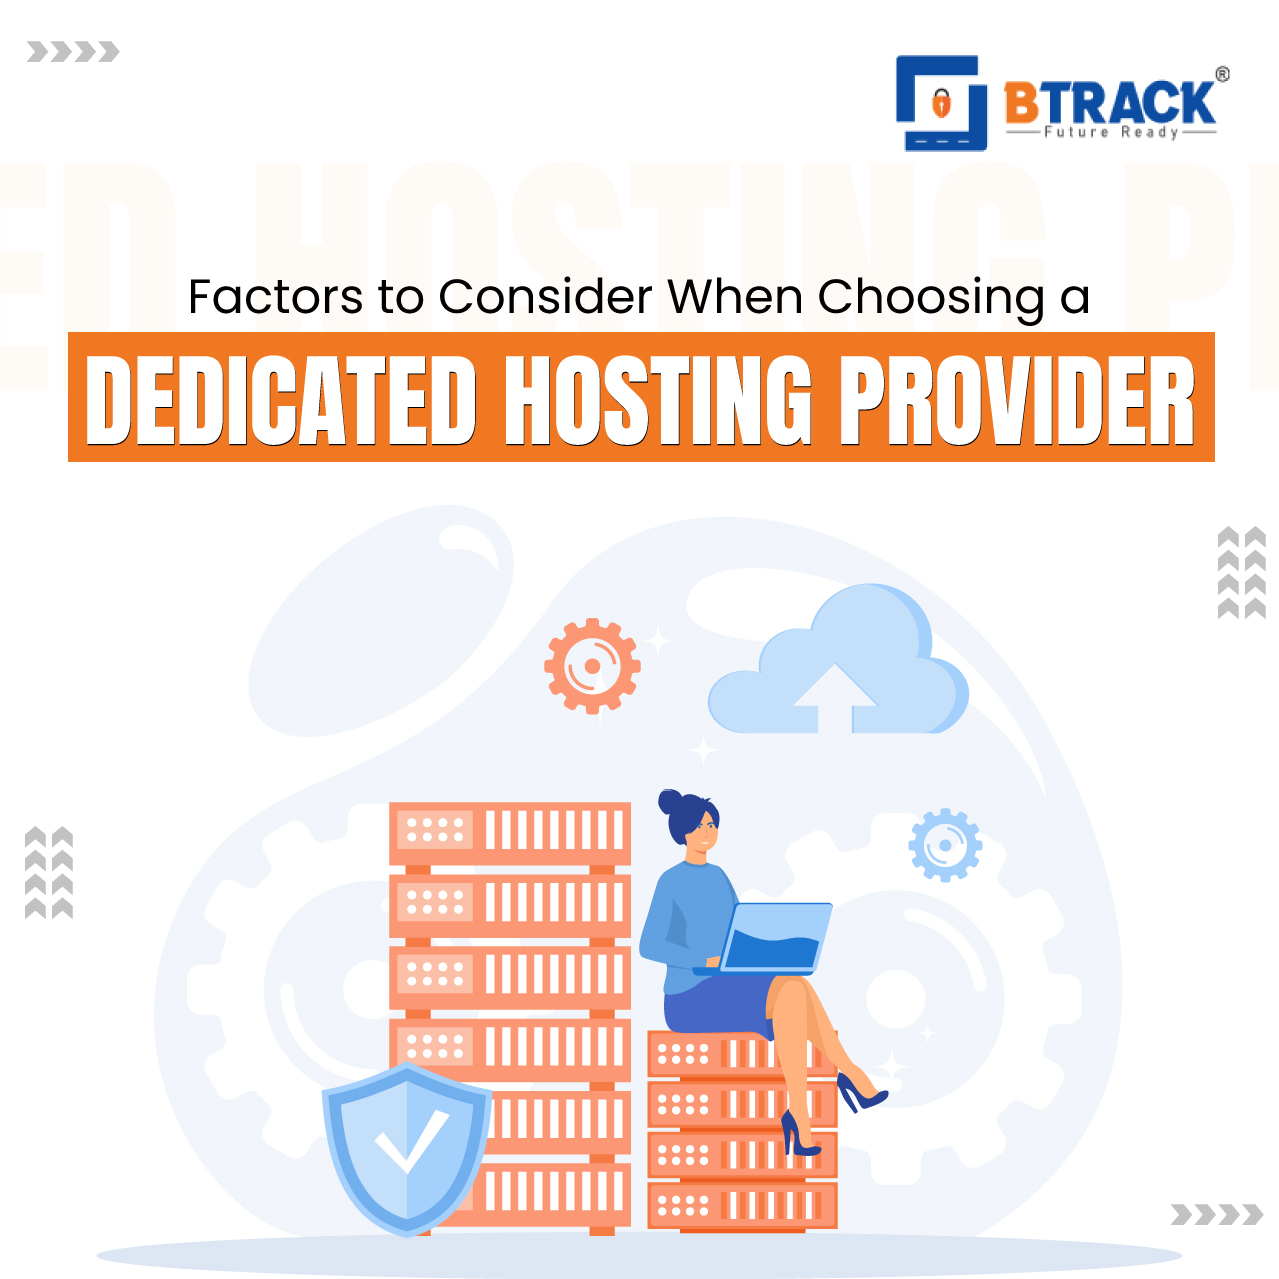 Factors to Consider When Choosing a Dedicated Hosting Provider